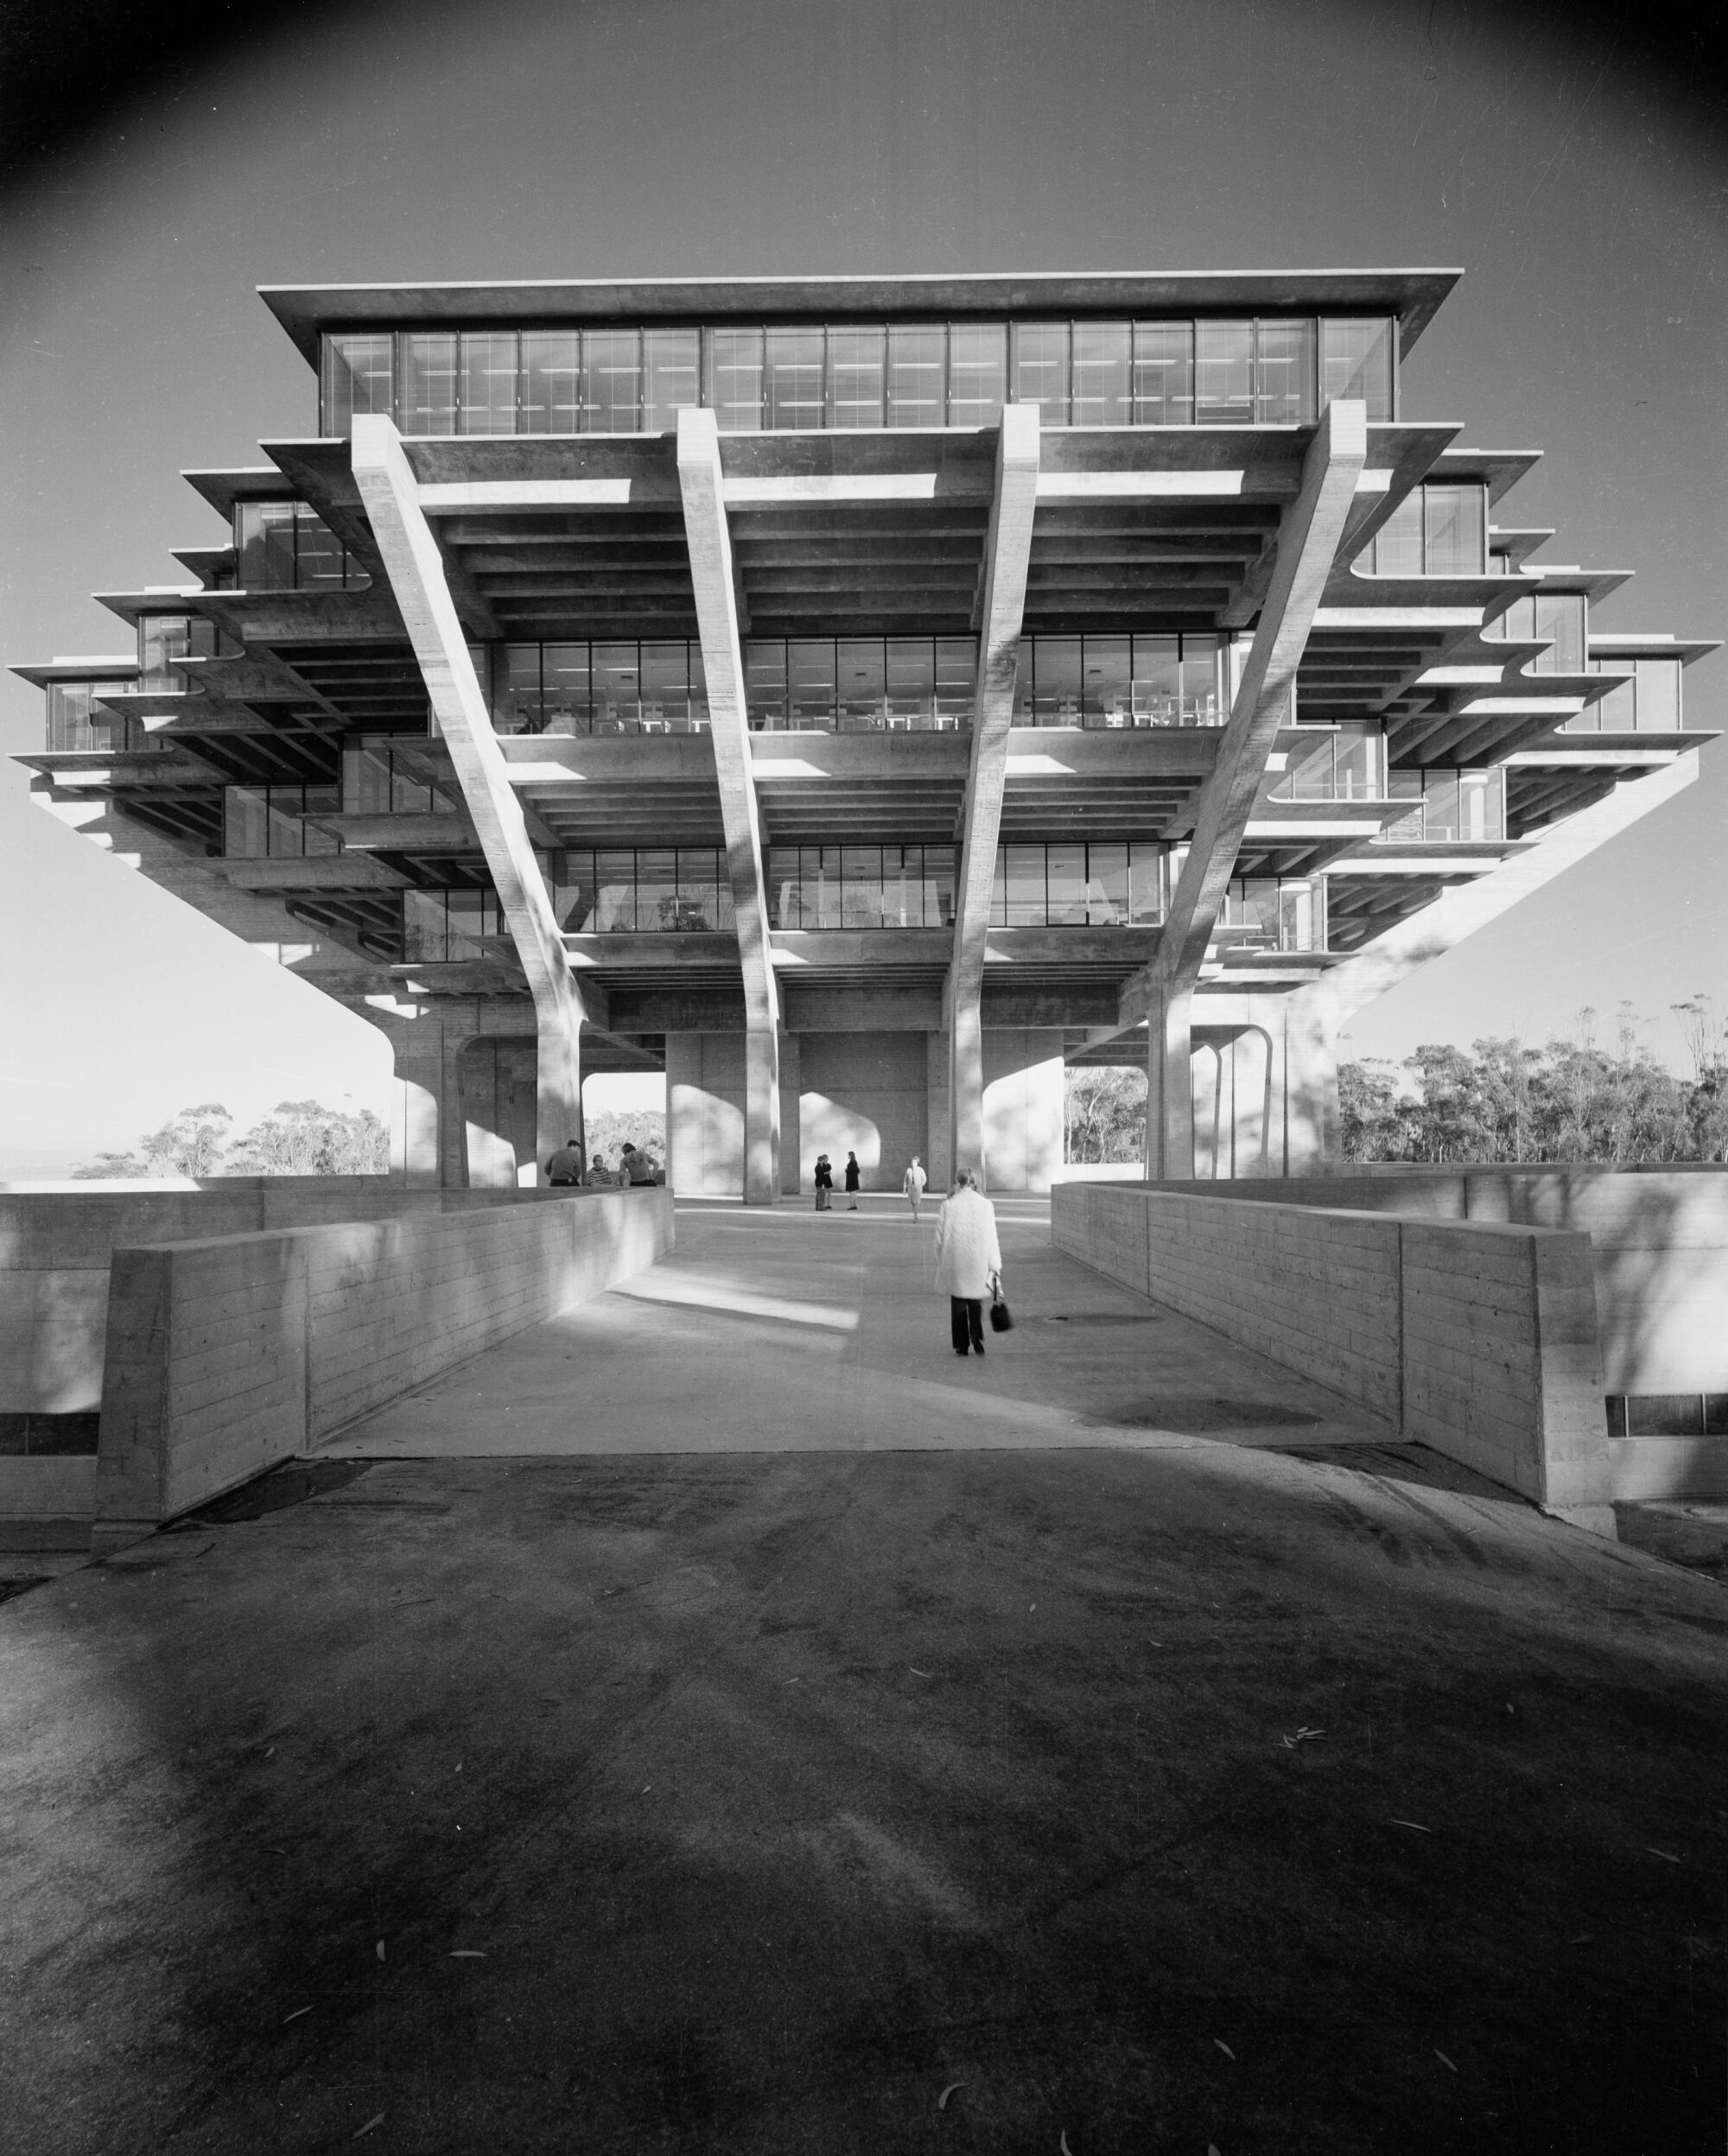 Gin Wong and William L. Pereira's Geisel Library at UC San Diego.